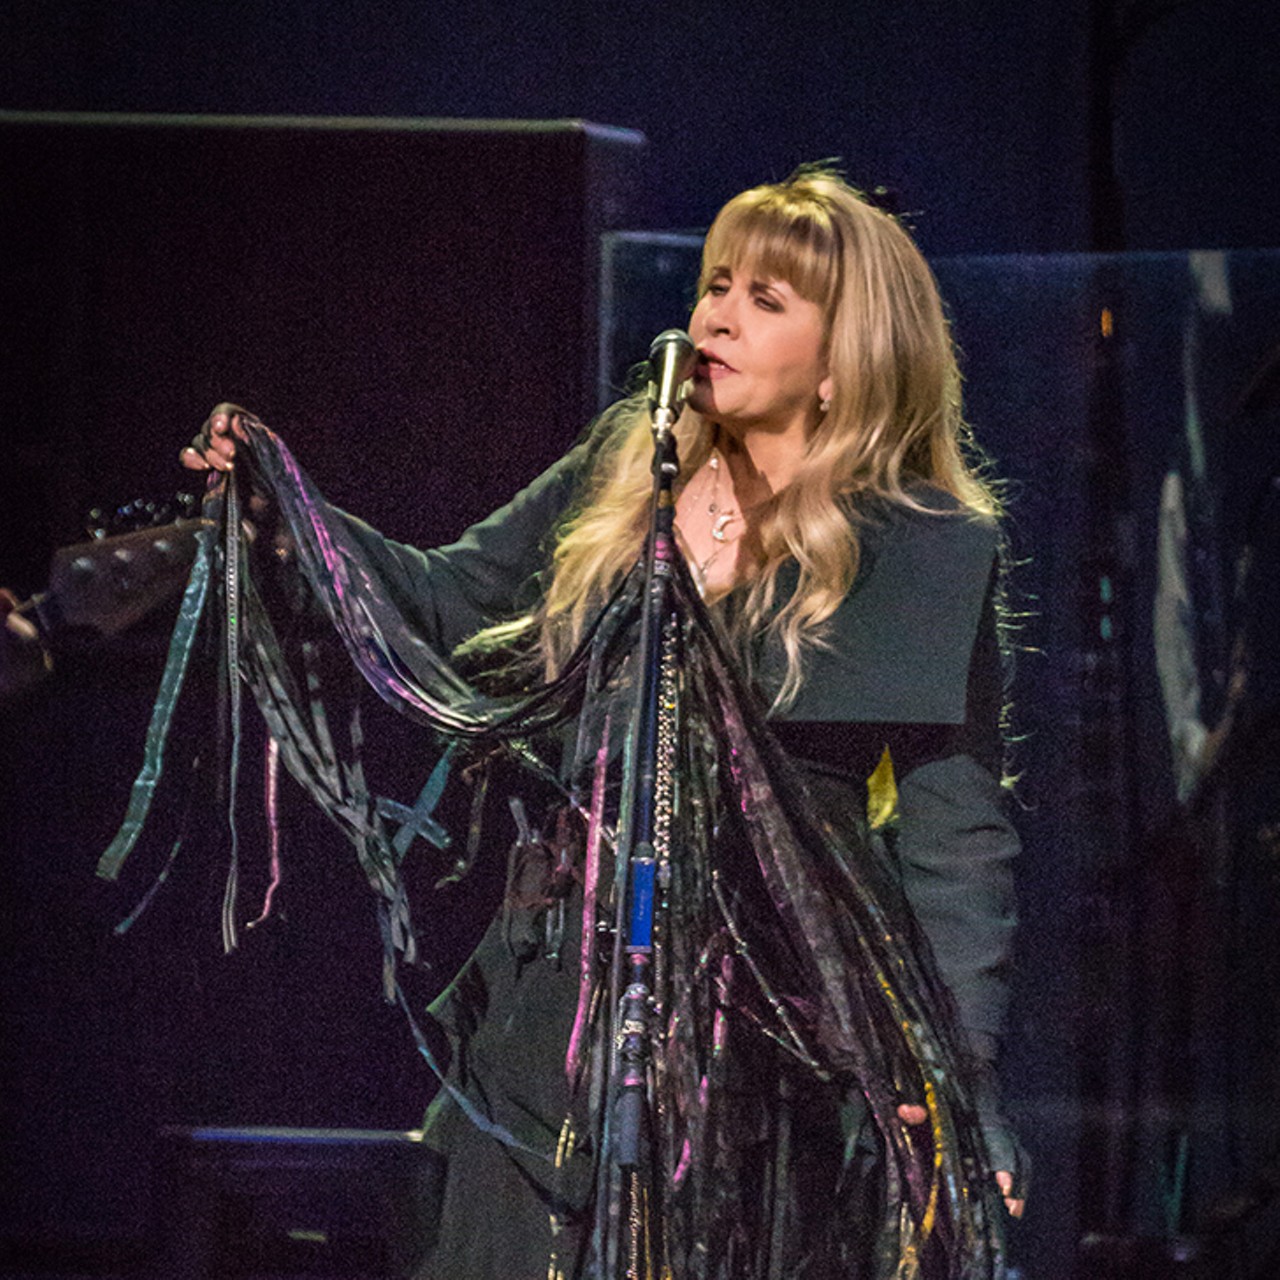 Photos from Fleetwood Mac's Performance in Columbus' Nationwide Arena